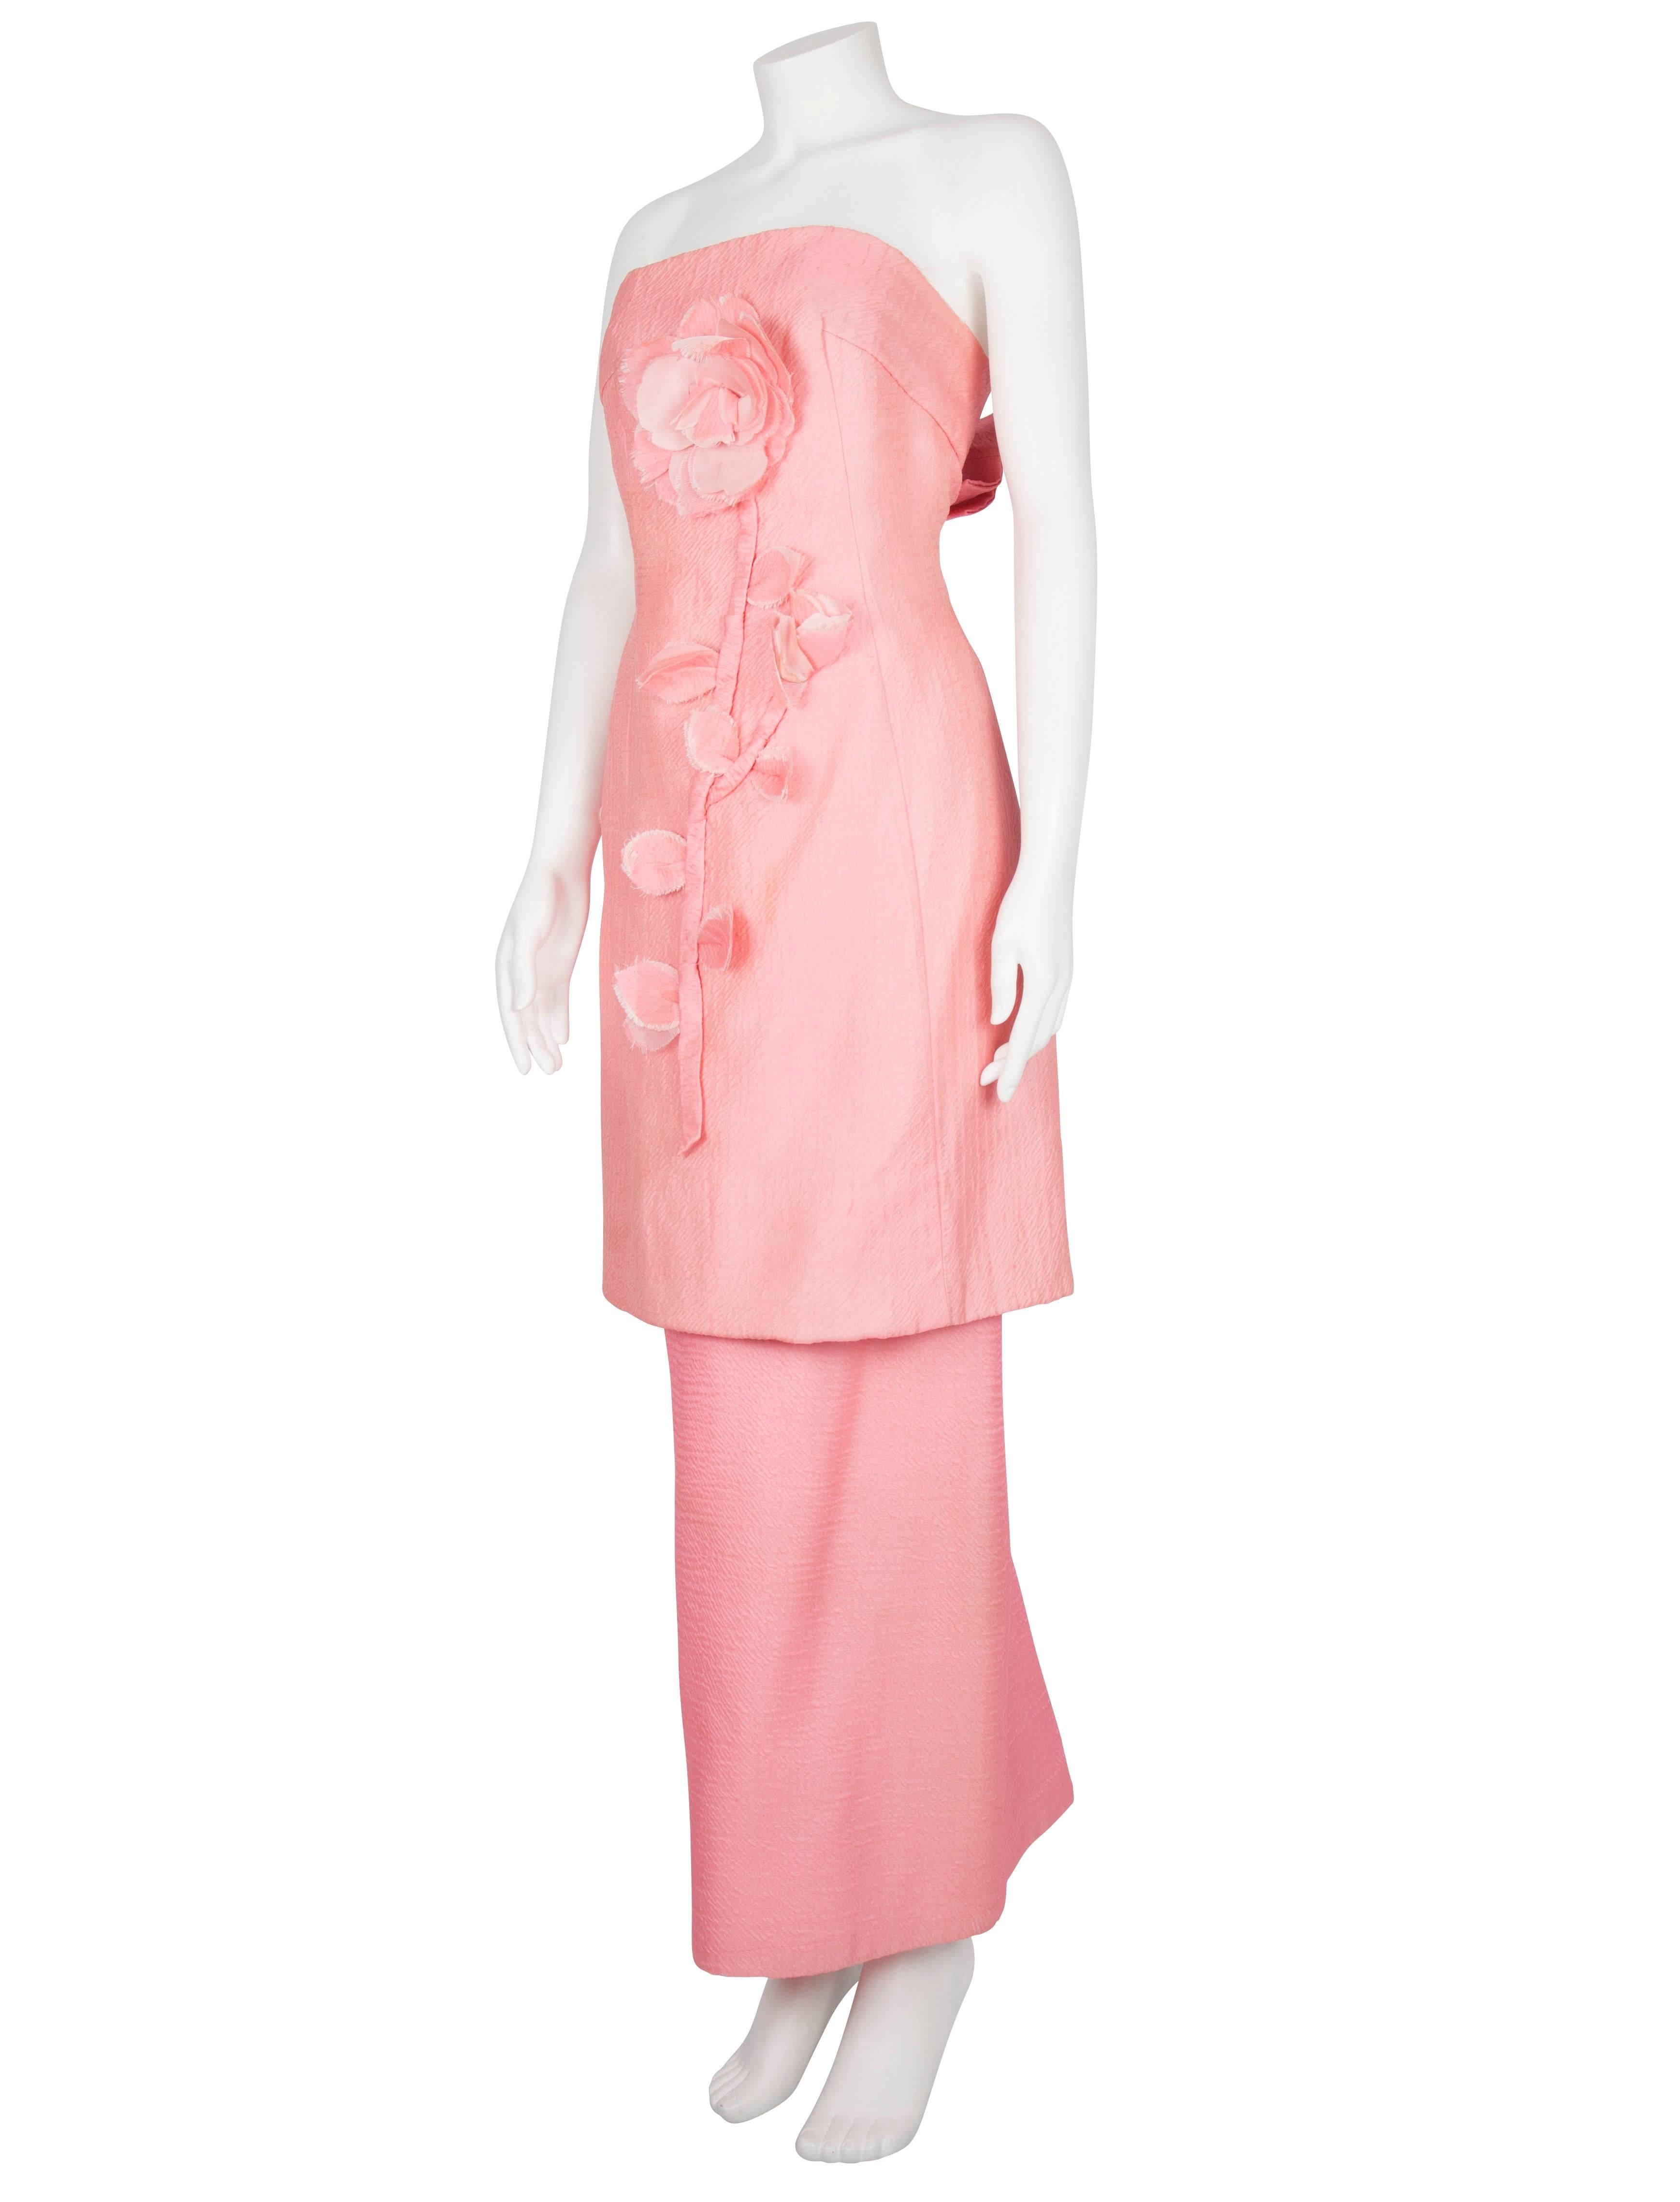 Harald Rose Pink Dress with Appliqued Flowers For Sale 2